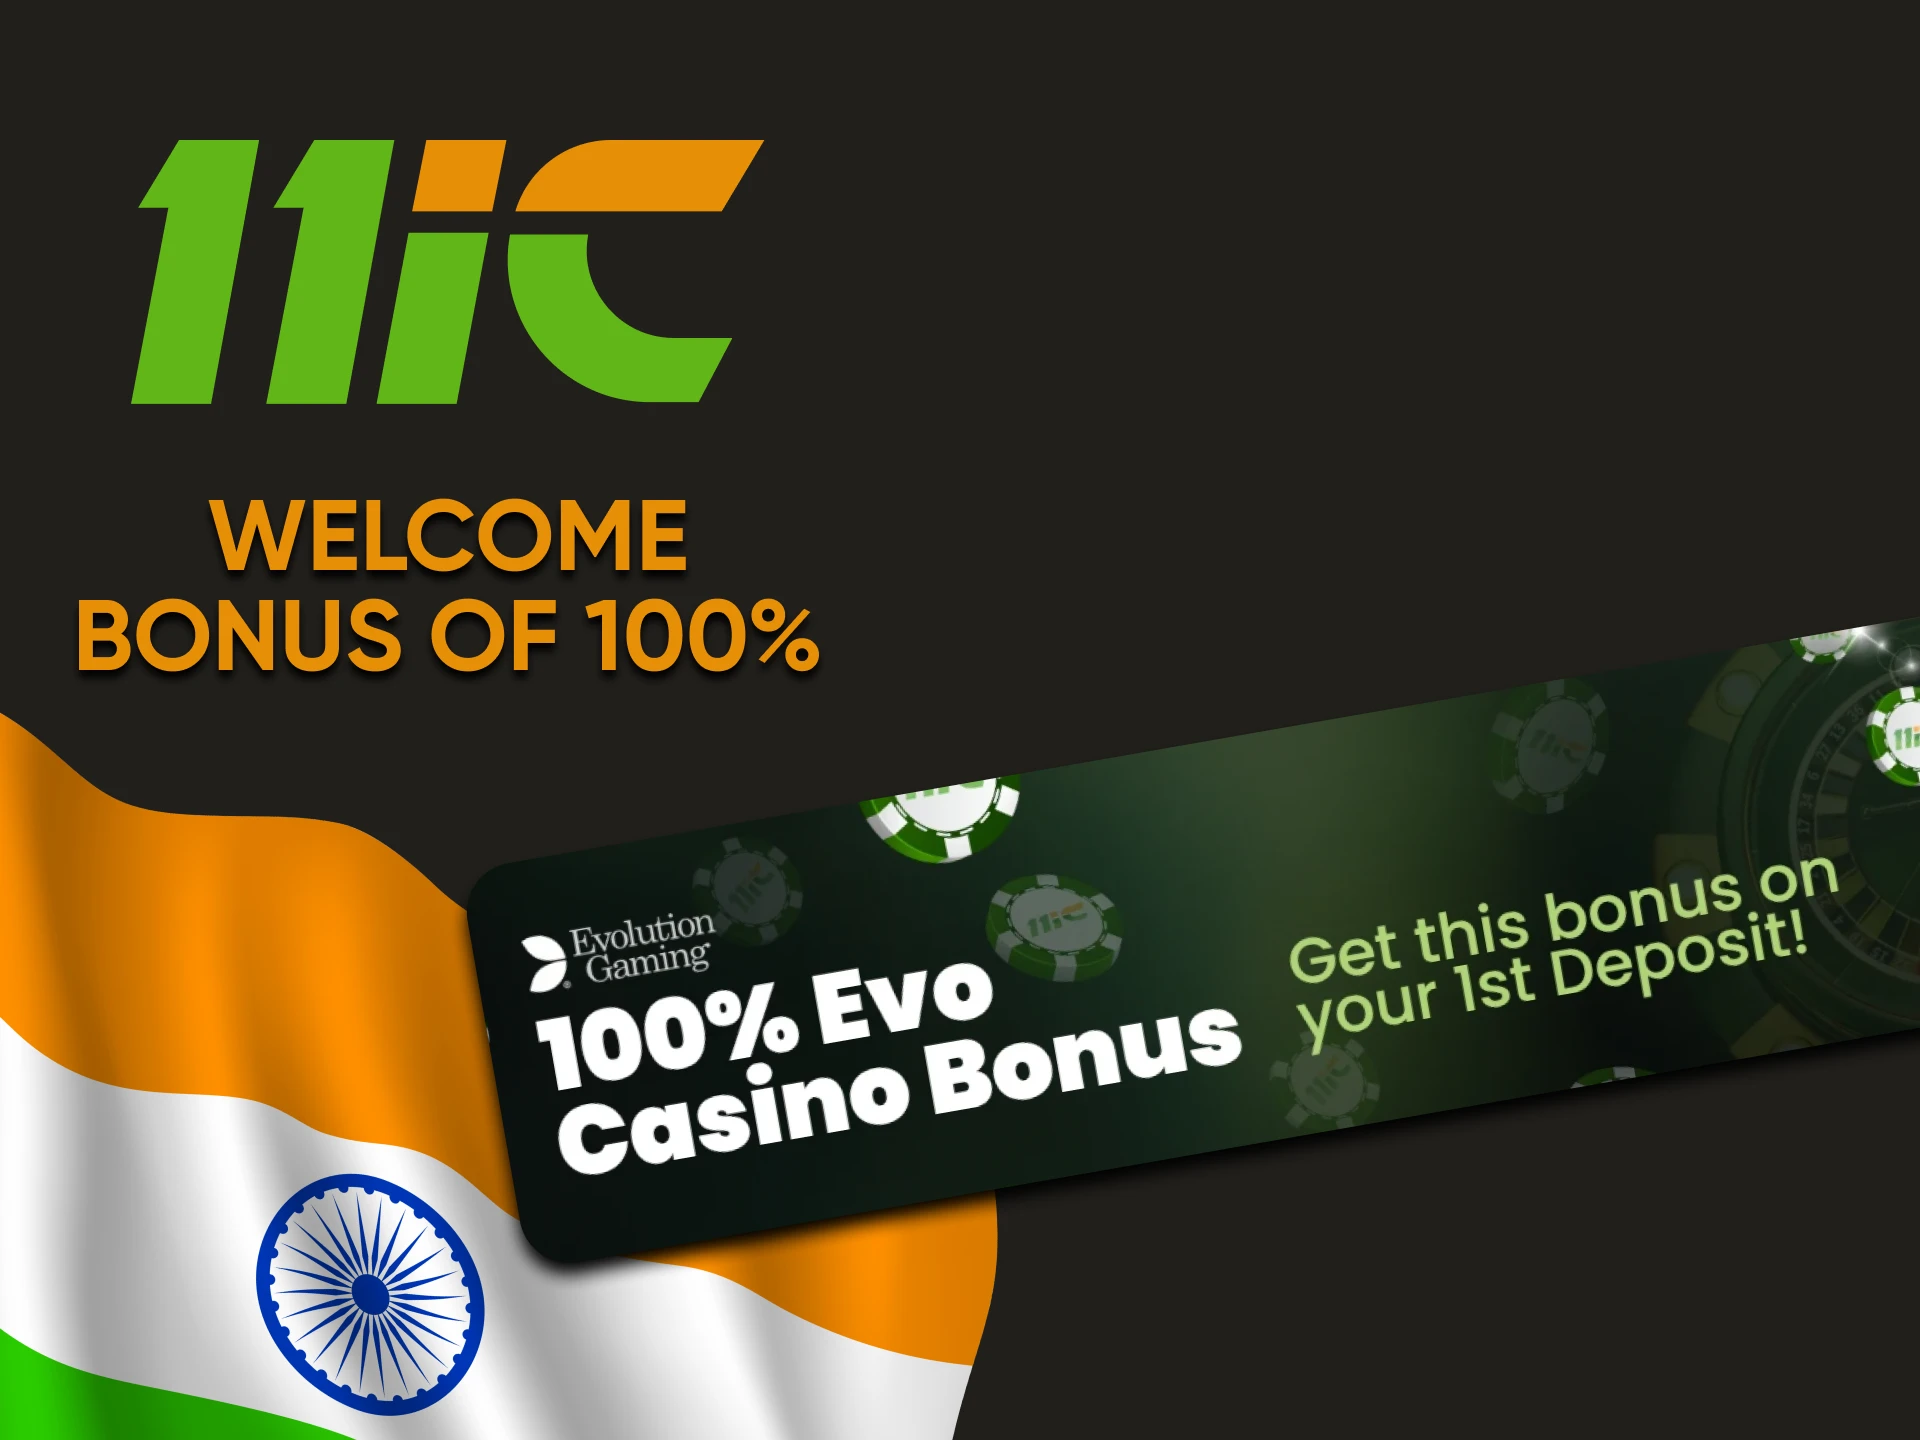 Get a welcome bonus from 11ic.